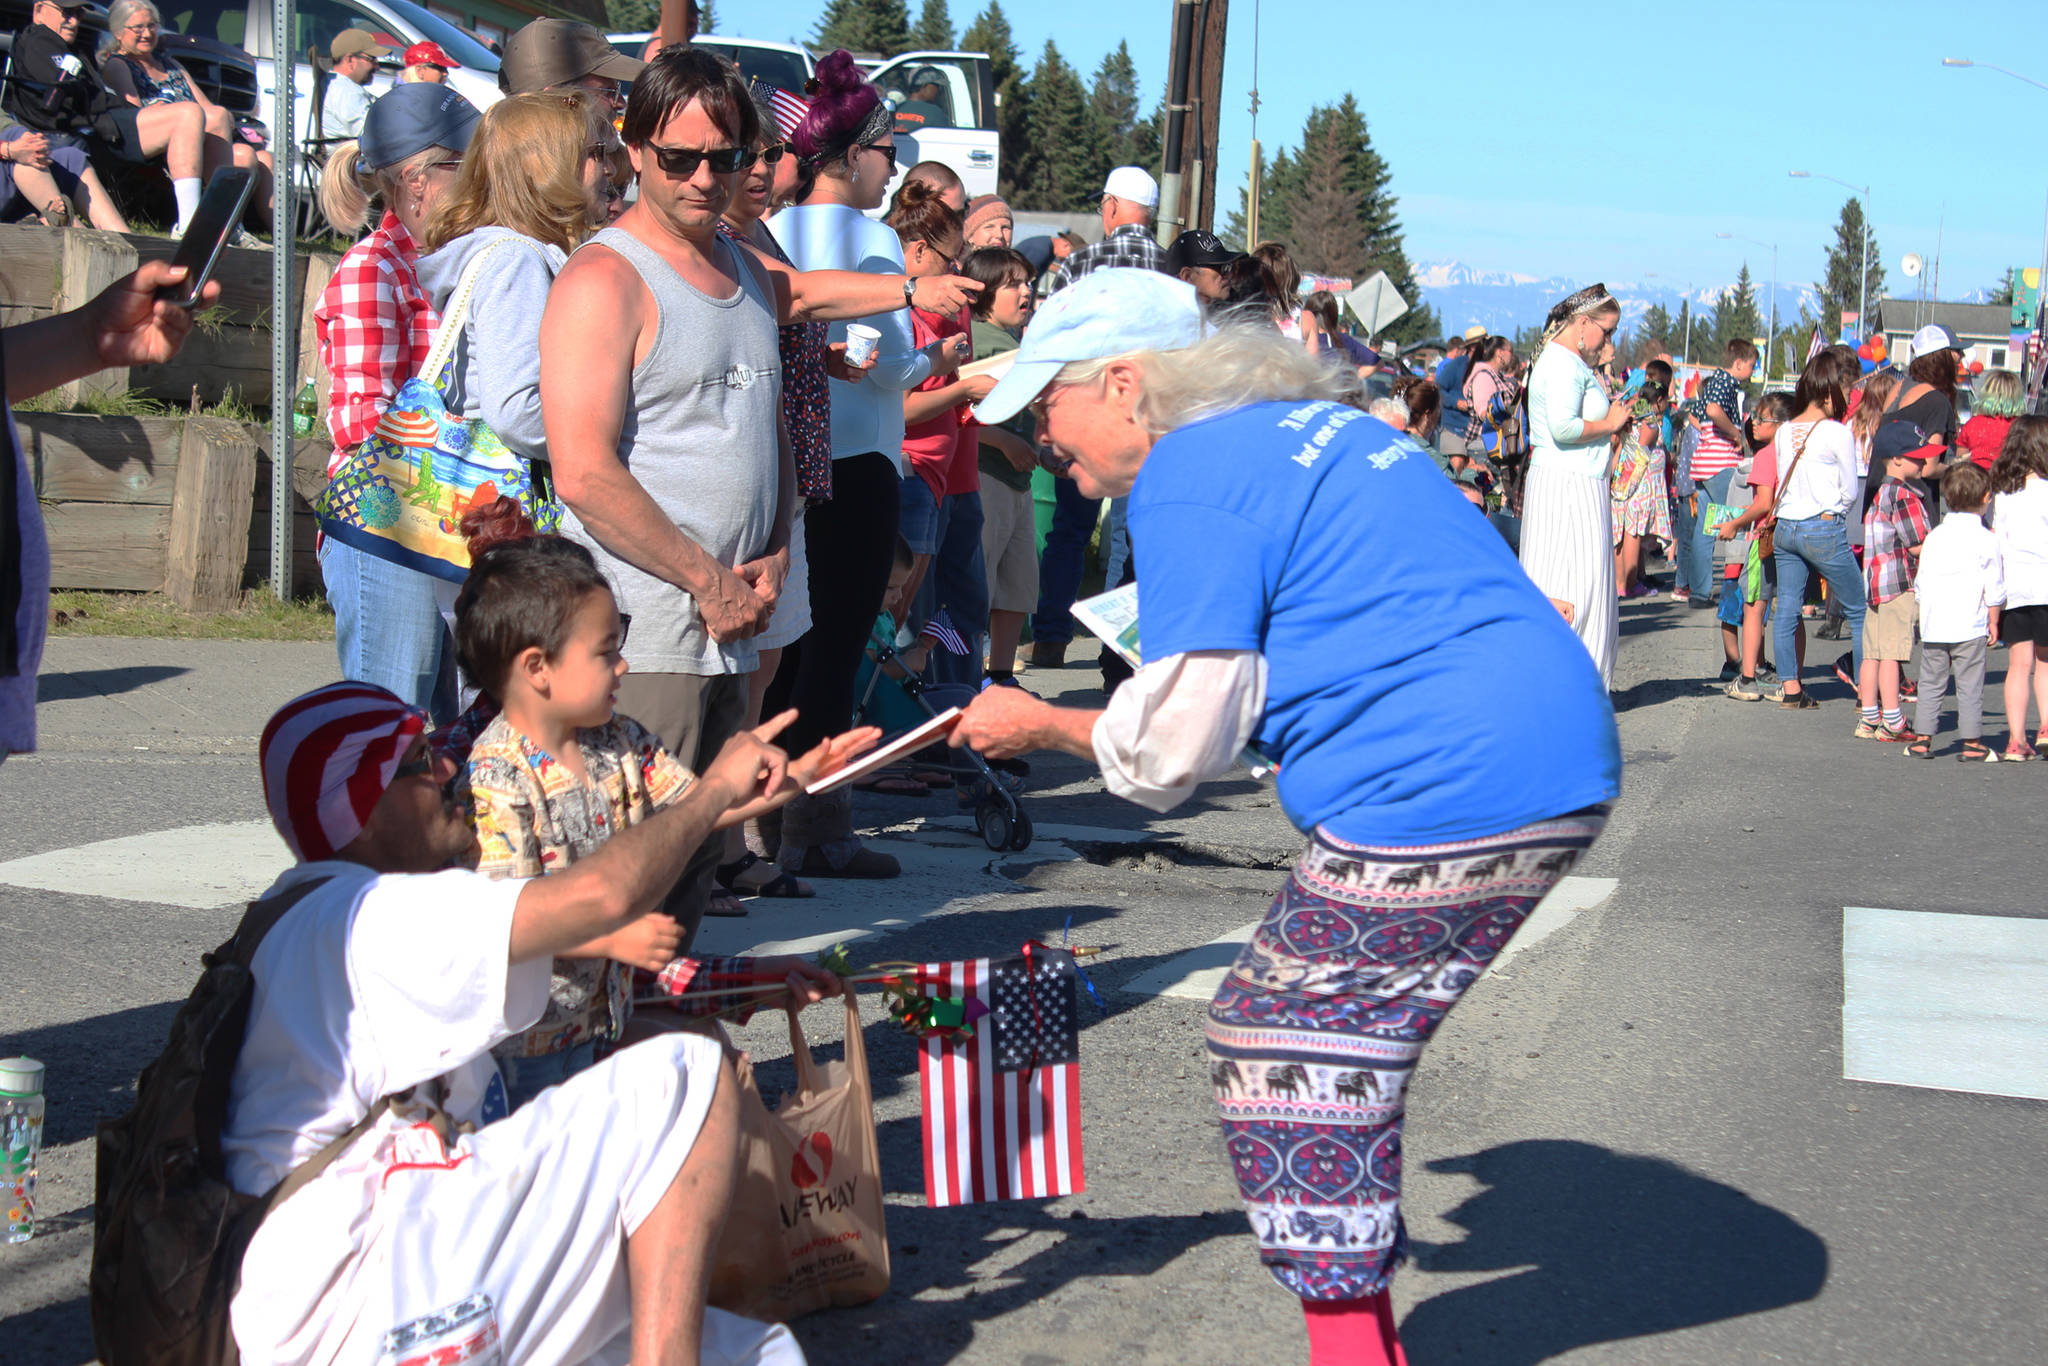 A member of the Friends of the Homer Library hands a book to a young boy and his family on Pioneer Avenue during the annual Independence Day parade Wednesday, July 4, 2018 in Homer, Alaska. The library friends marched down the street pushing book shelves on wheels filled with various volumes to hand out to spectators. (Photo by Megan Pacer/Homer News)